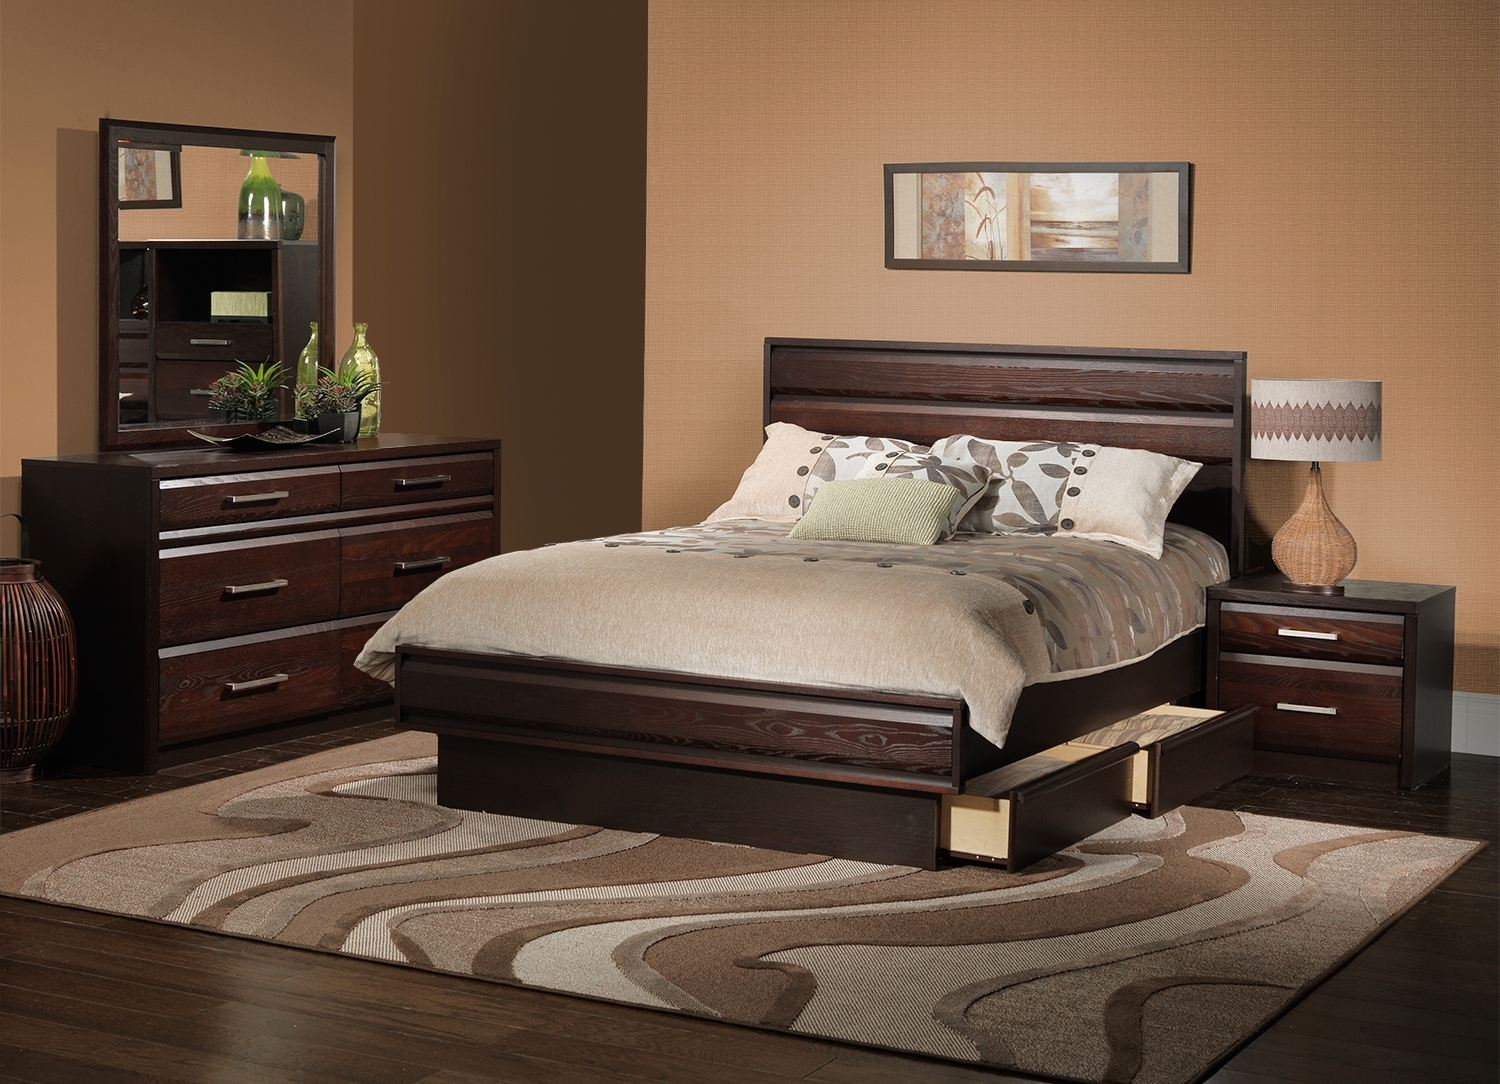 Wooden Platform Queen Captivating Wooden Platform Drawers Of Queen Bedroom Sets Furnished With Night Lamp On Nightstand And Completed With Mirror On Vanity Bedroom Queen Bedroom Sets For The Modern Style